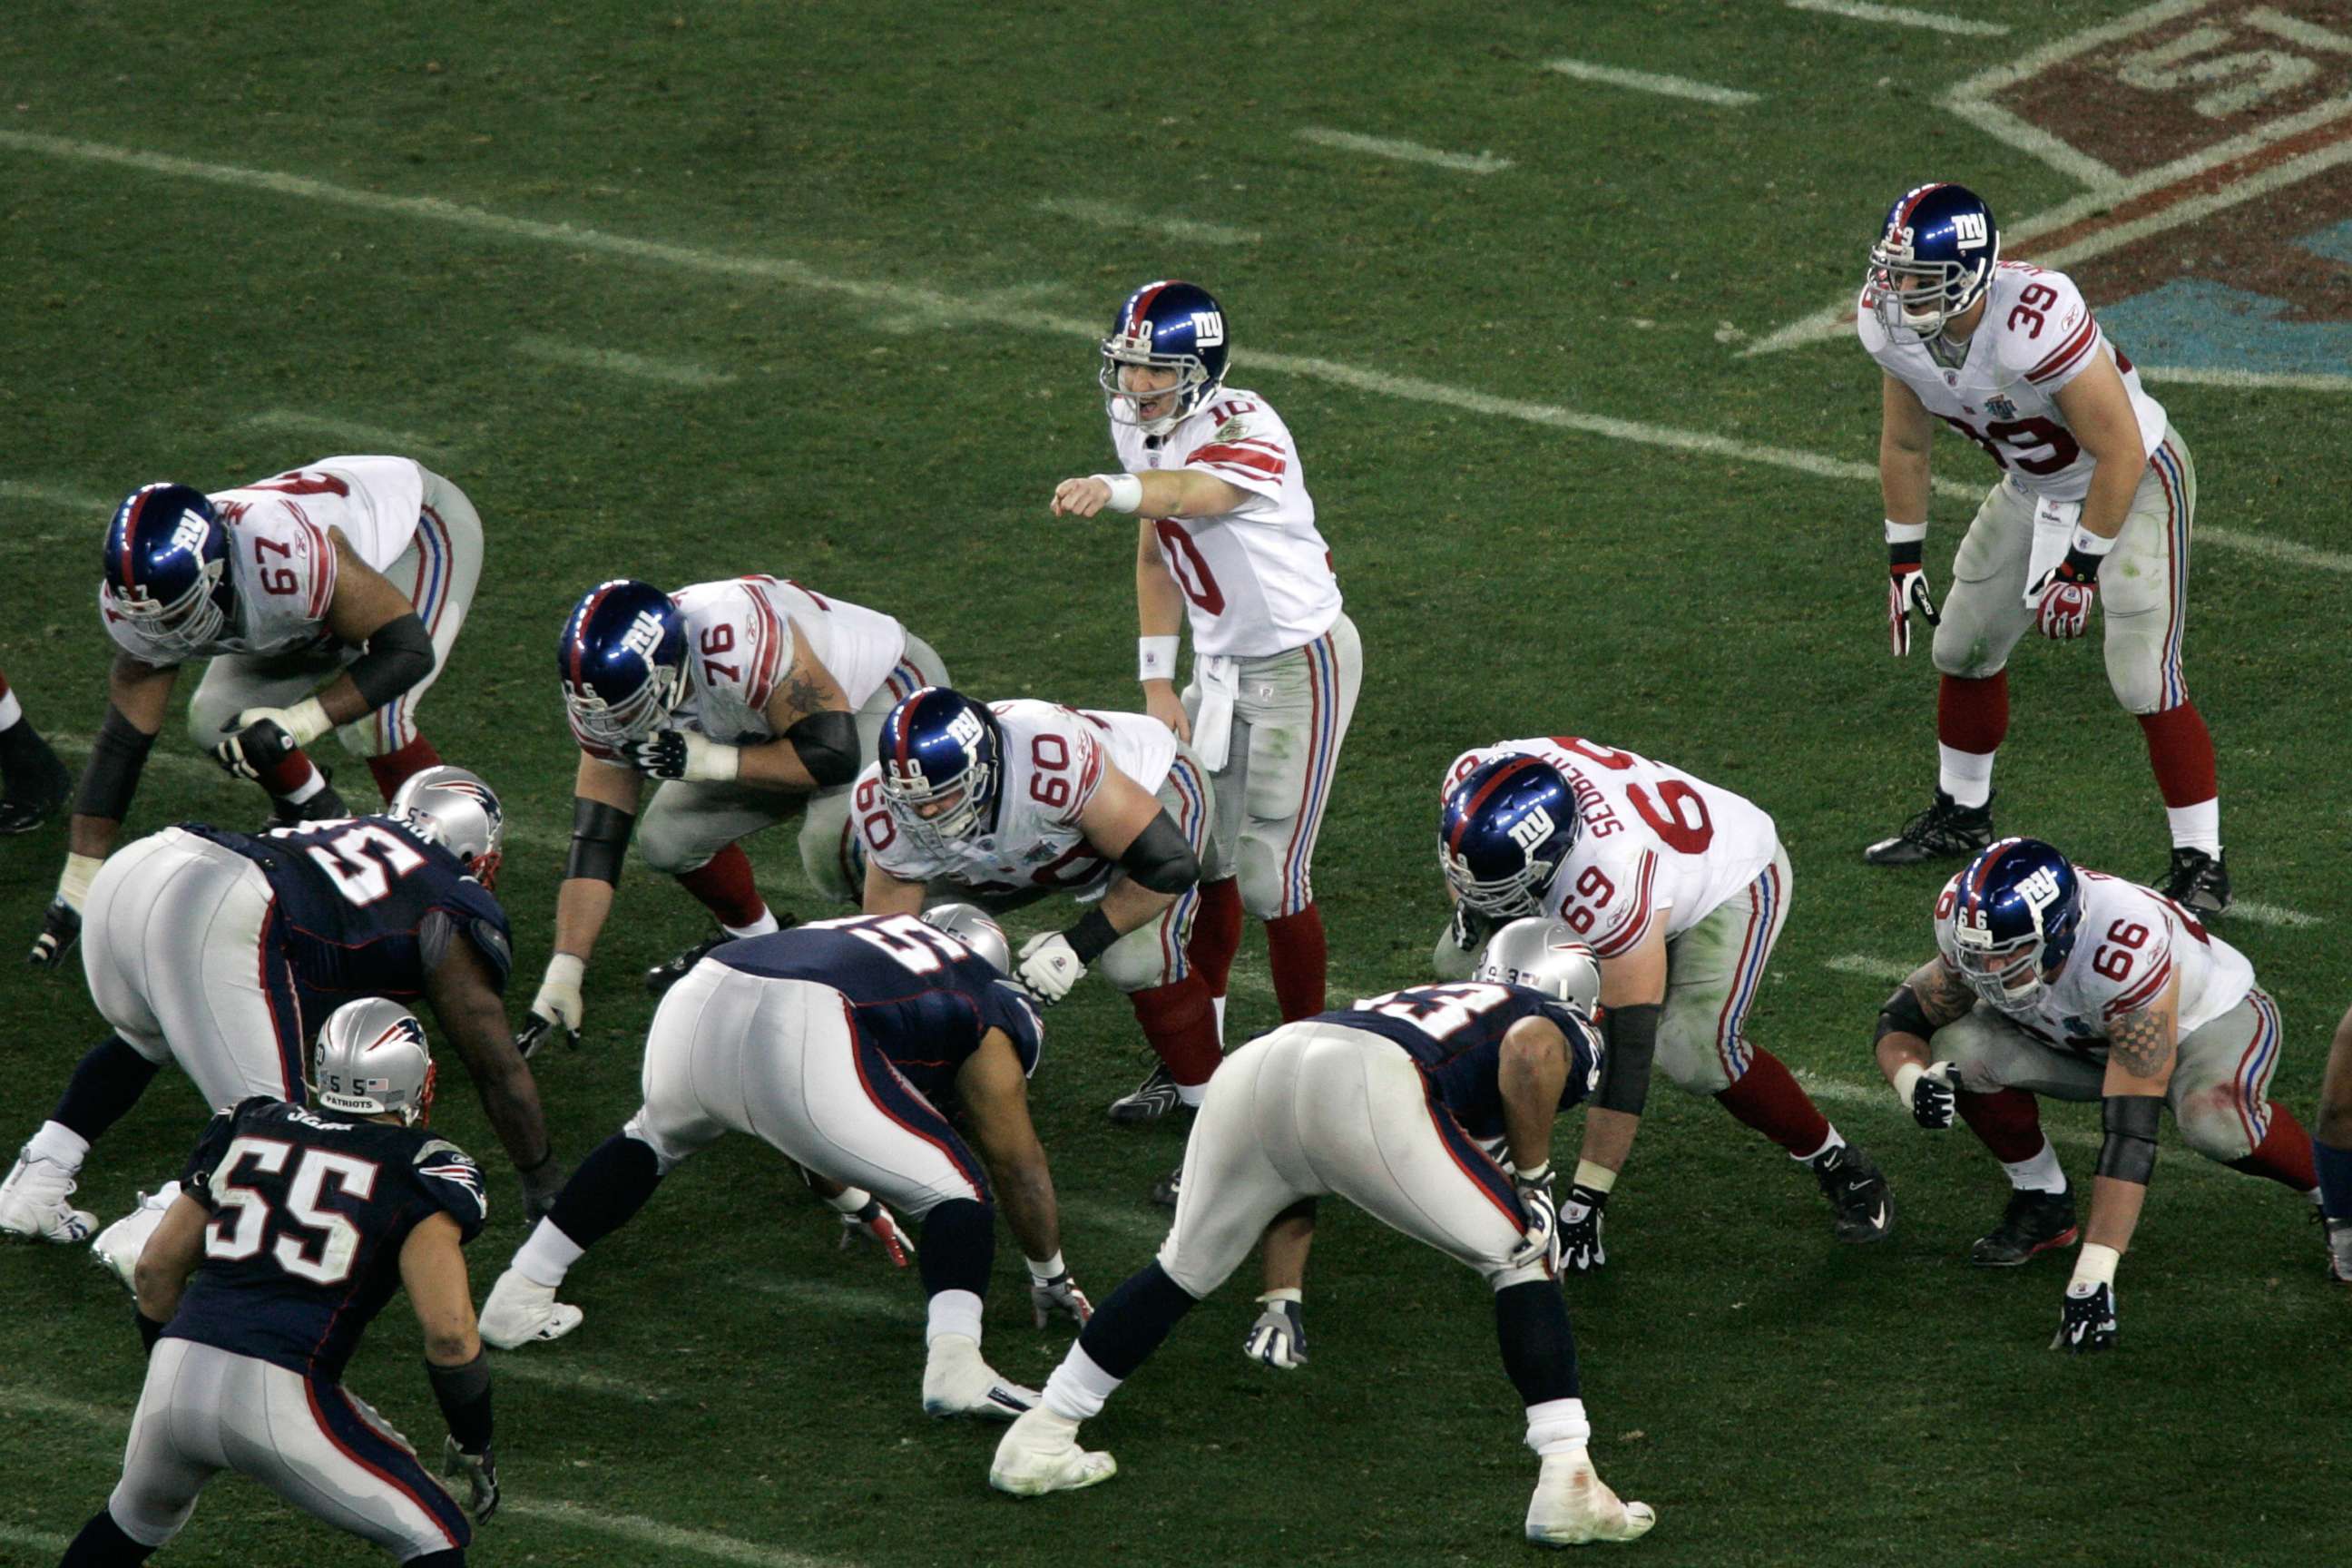 PHOTO: Quarterback Eli Manning #10 of the New York Giants points as he calls out signals prior to the snap at the line of scrimmage against the New England Patriots during Super Bowl XLII at University of Phoenix Stadium, Feb. 3, 2008, in Glendale, Ariz. 